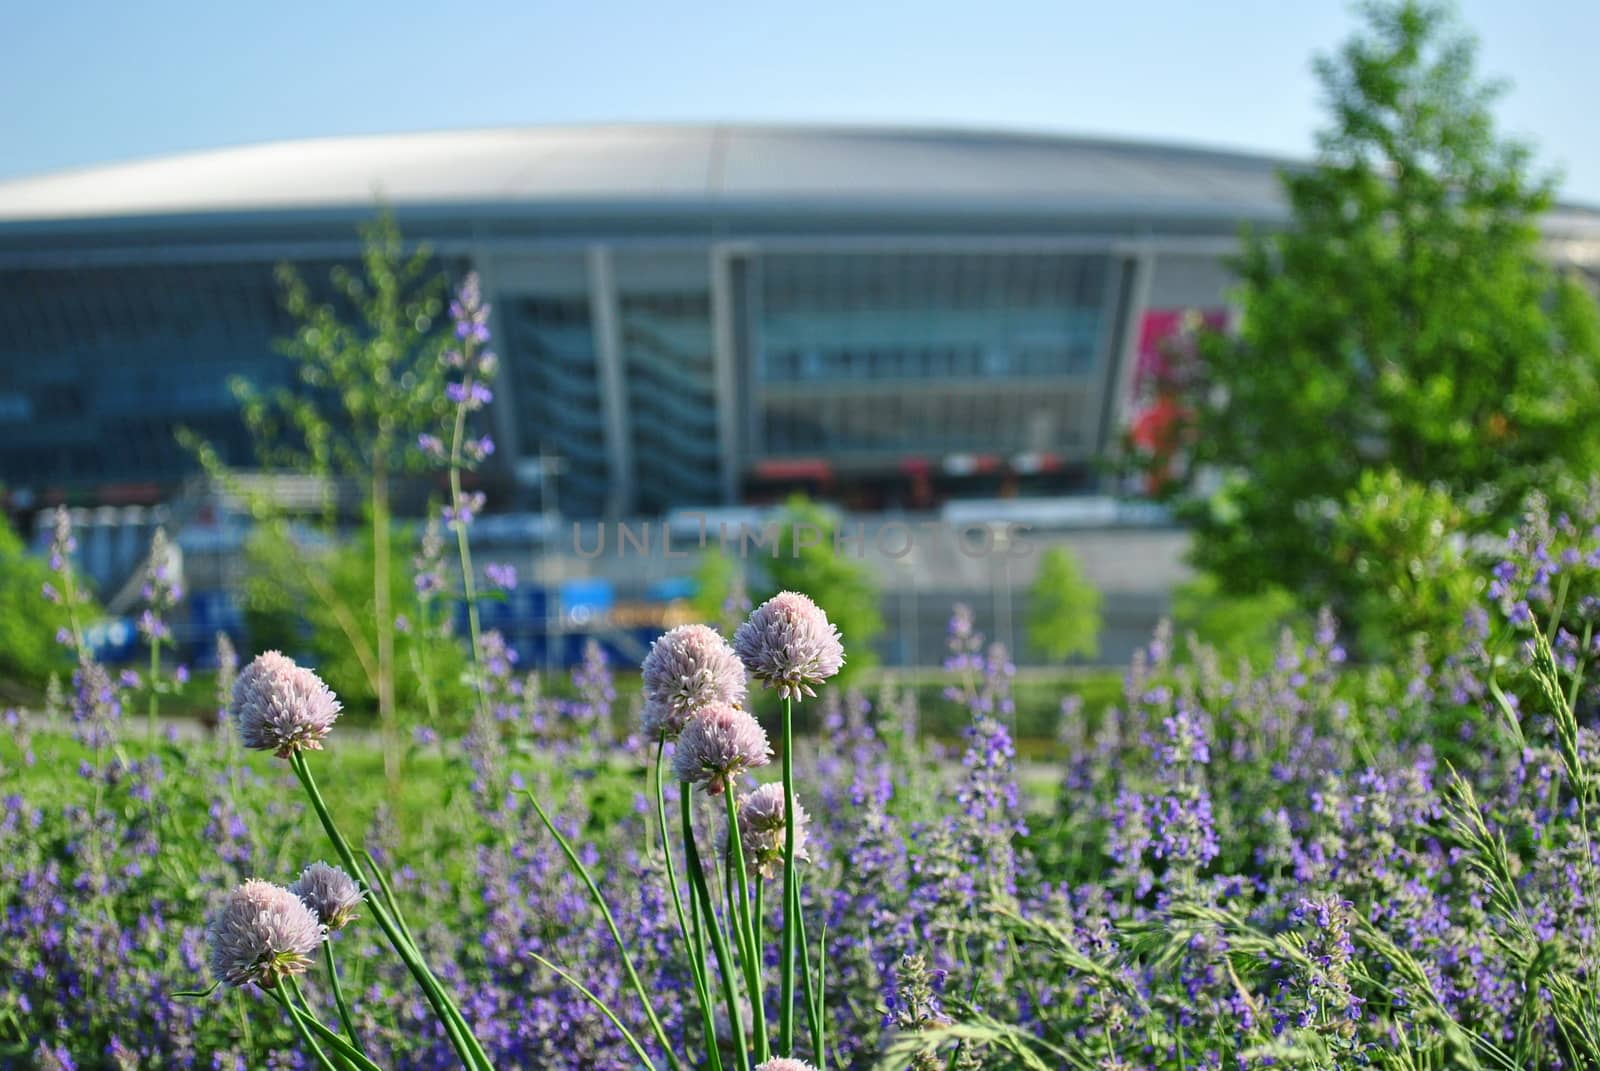 Flowers bloom in spring in the park near the stadium